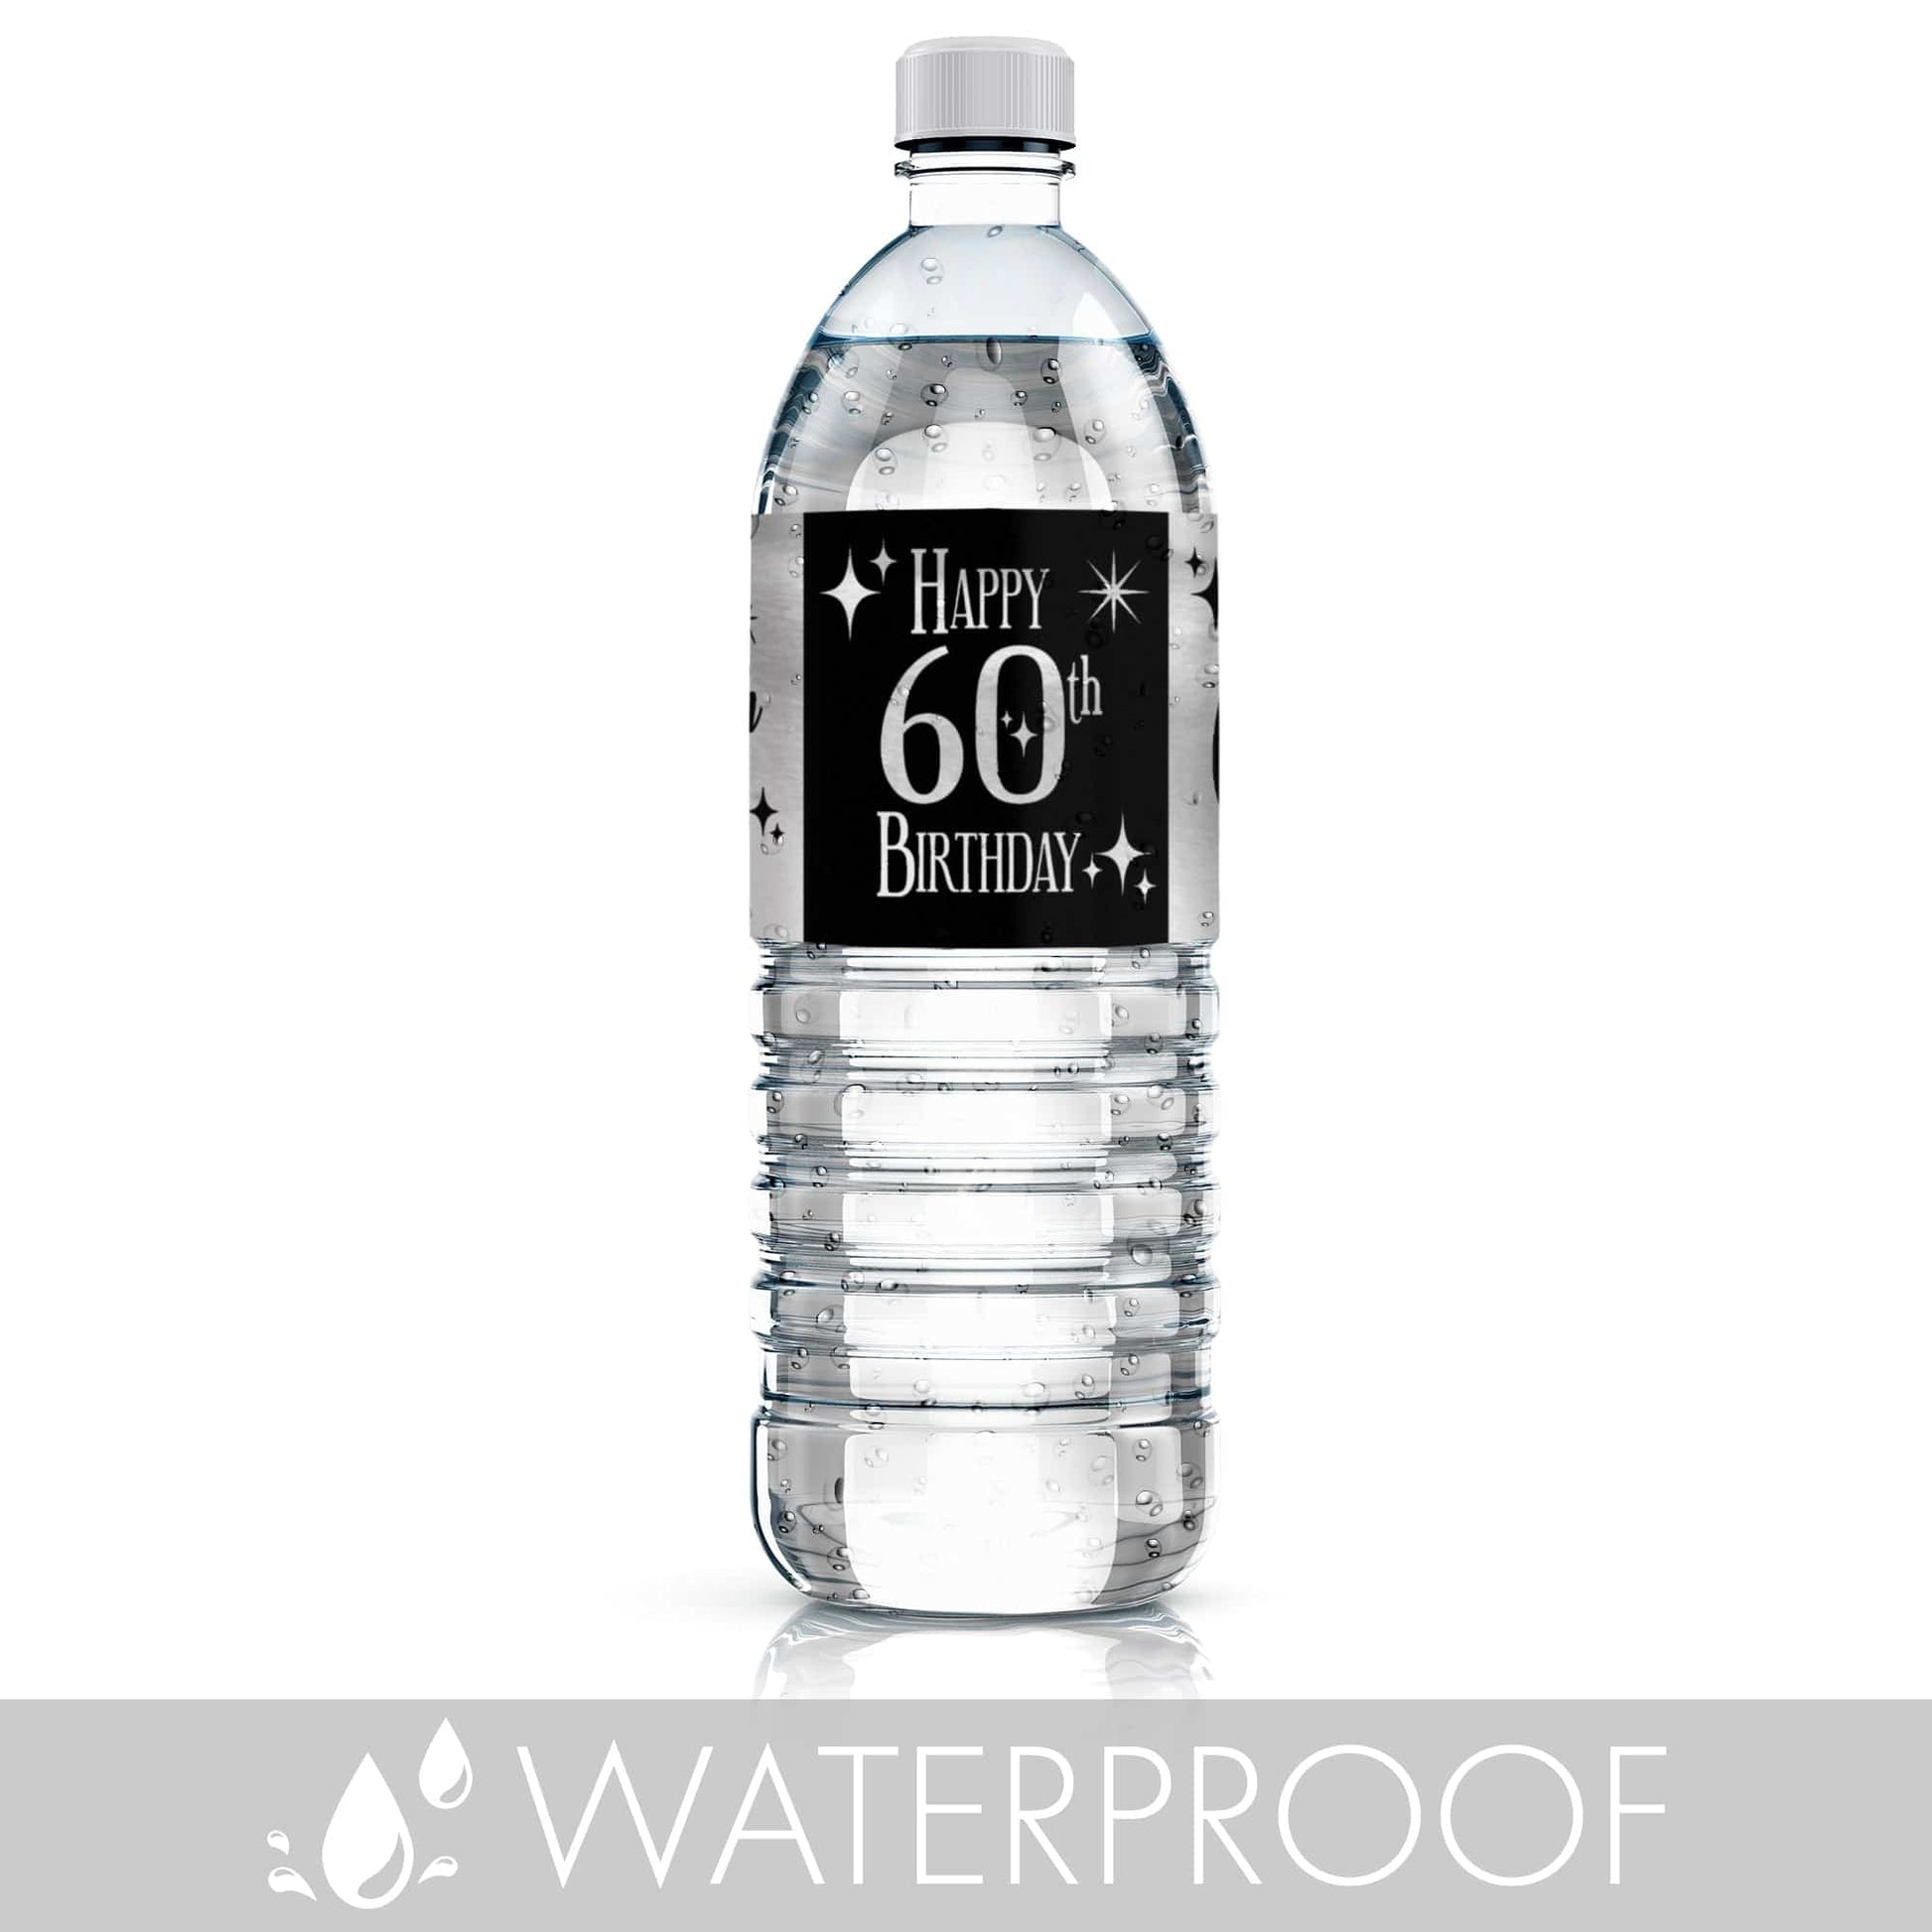 Throw a 60th birthday party with these black and silver foil water bottle labels!